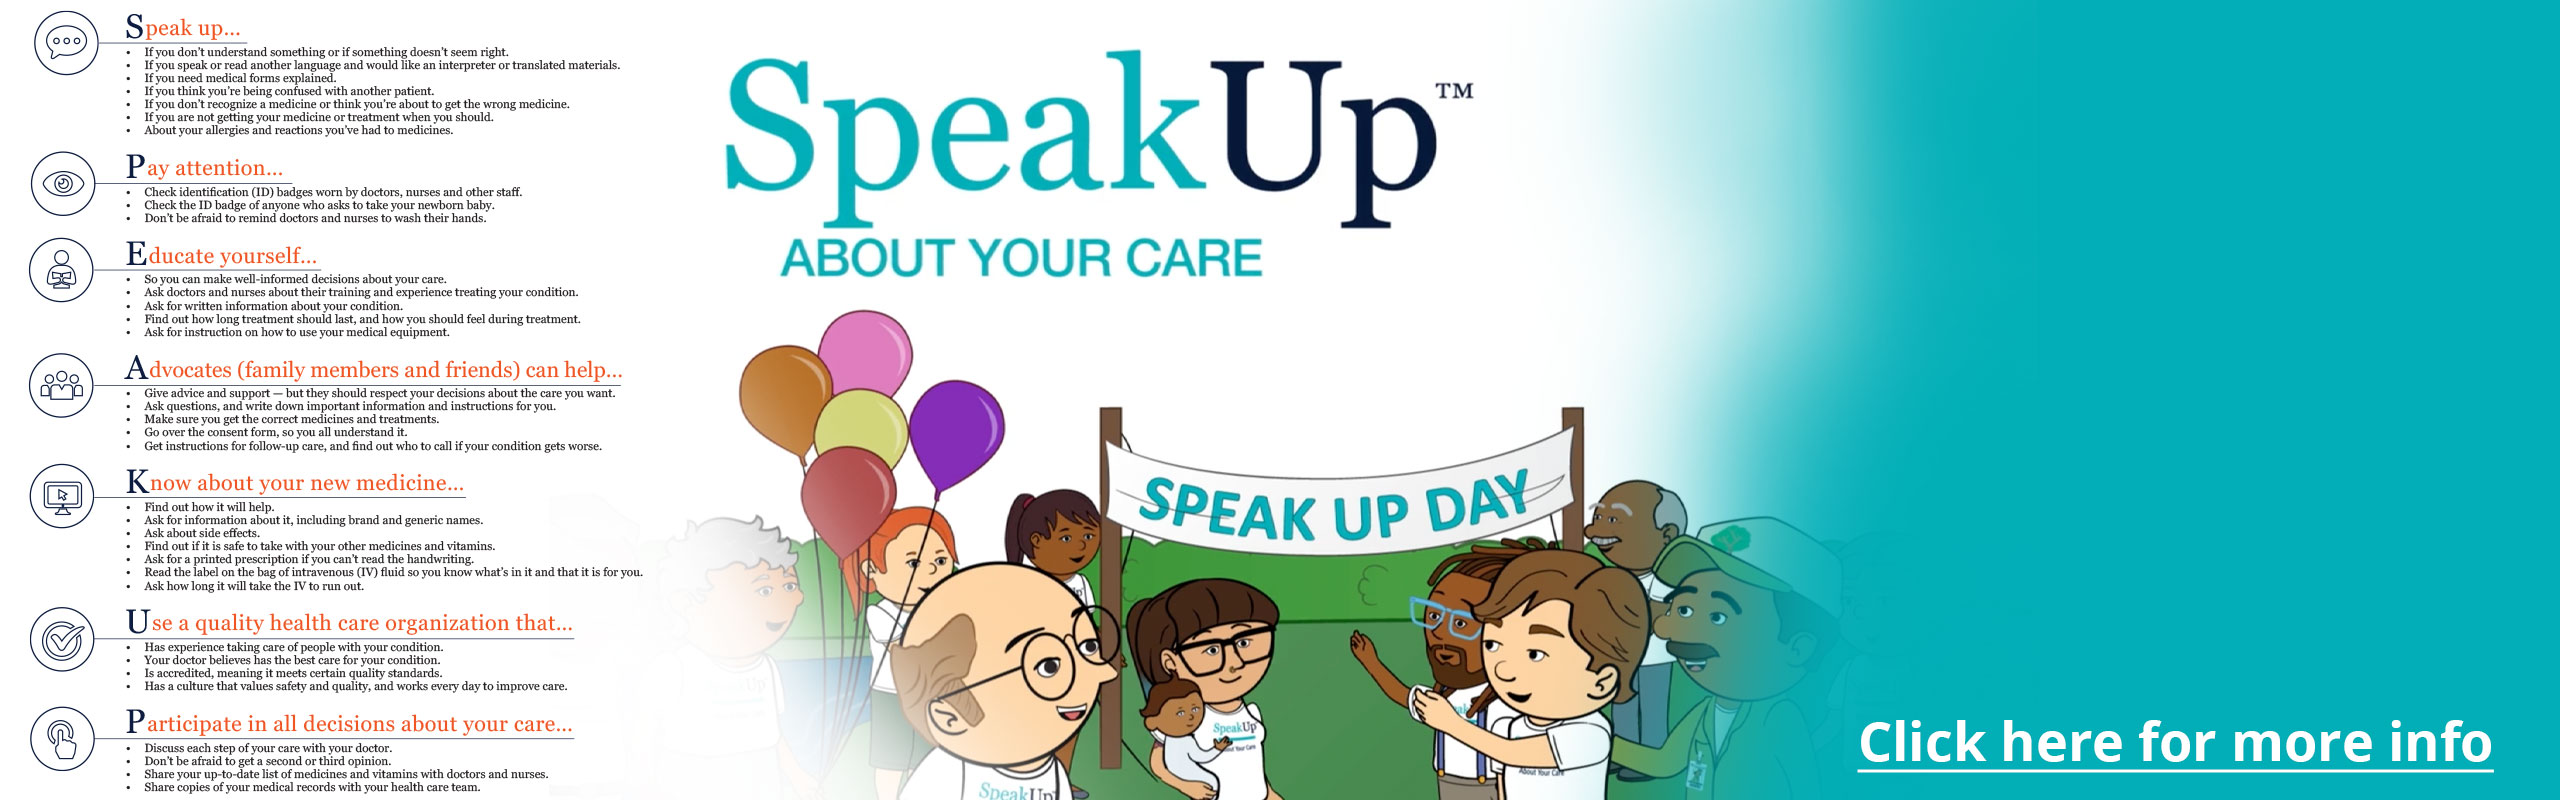 Banner picture graphic of cartoon figure people wearing shirts that say "Speak up about your care" They are outside standing in front of a large banner sign that says "SPEAK UP DAY" 
Someone is holding 5 balloons 

Banner says:
Speak up
Pay attention
Educate yourself
Advocates (family members and friends) can help...
Know about your new medicine...
Use a quality health care organization
Participate in all decisions about your care

(Click here for more info)